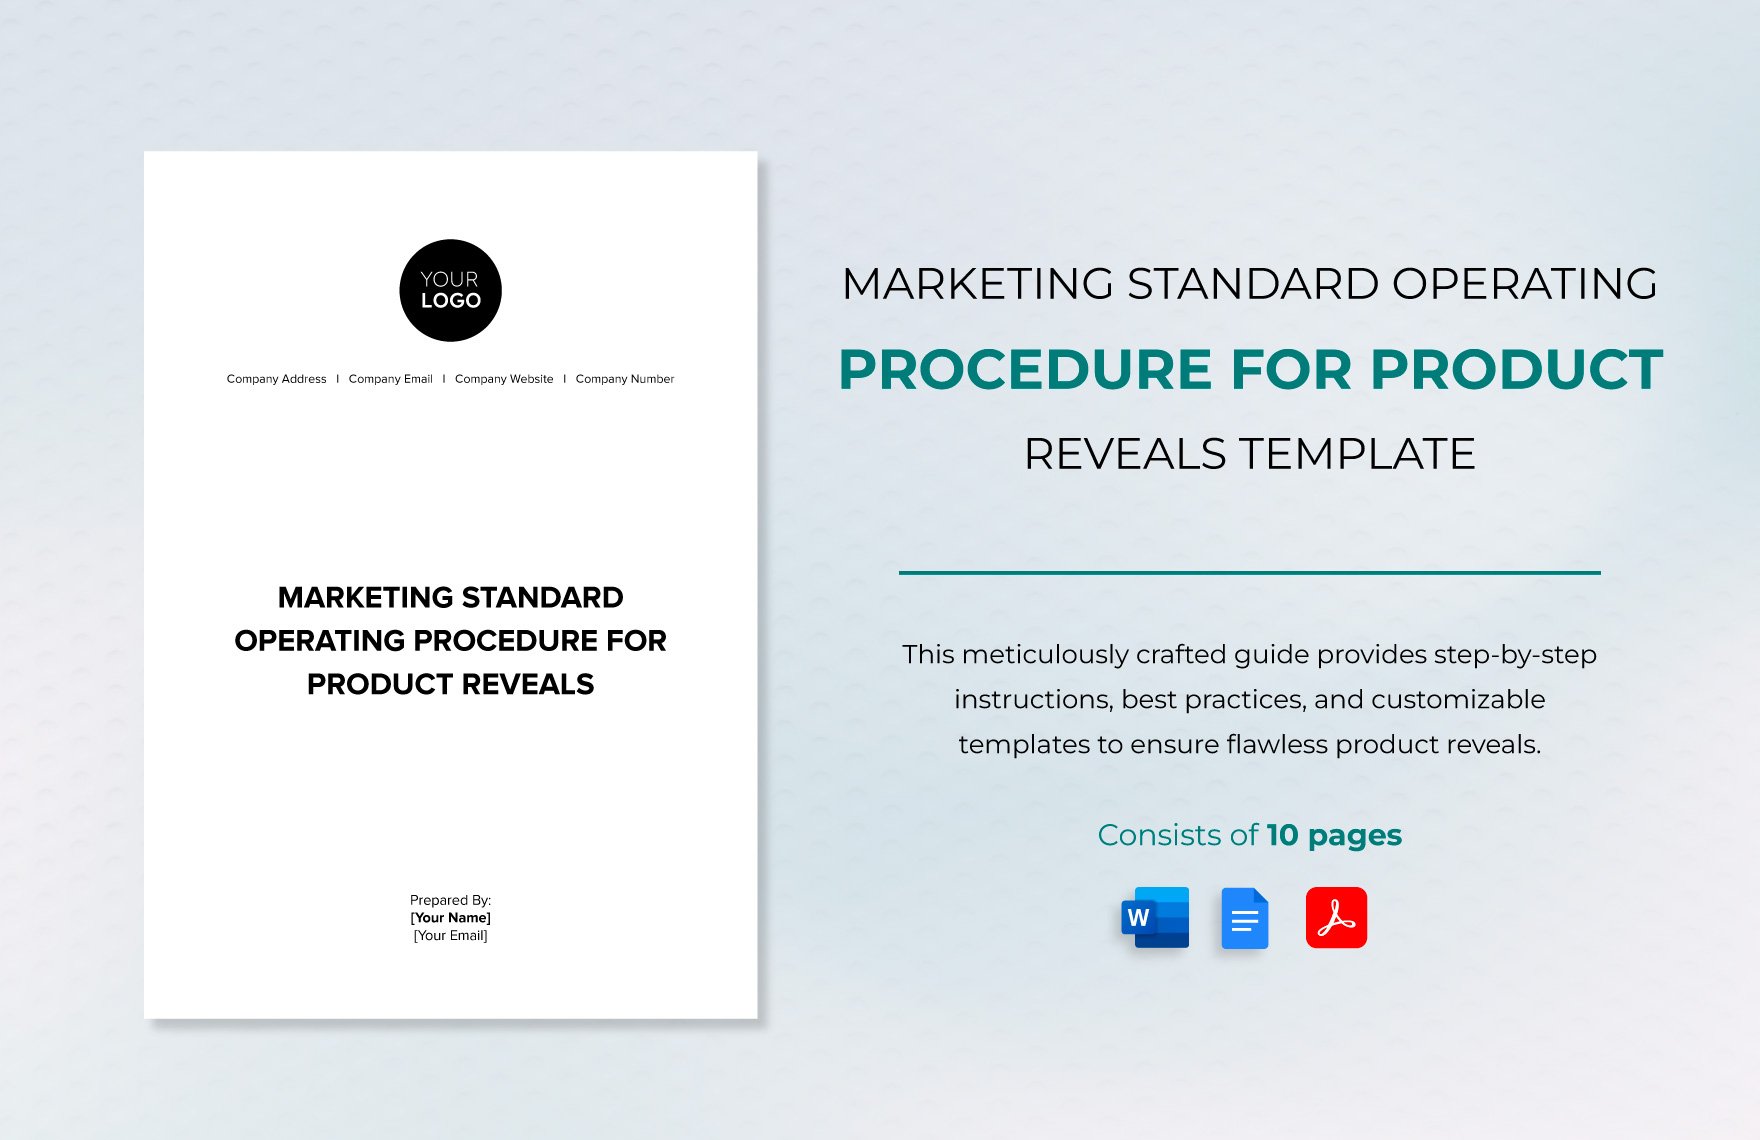 Marketing Standard Operating Procedure for Product Reveals Template